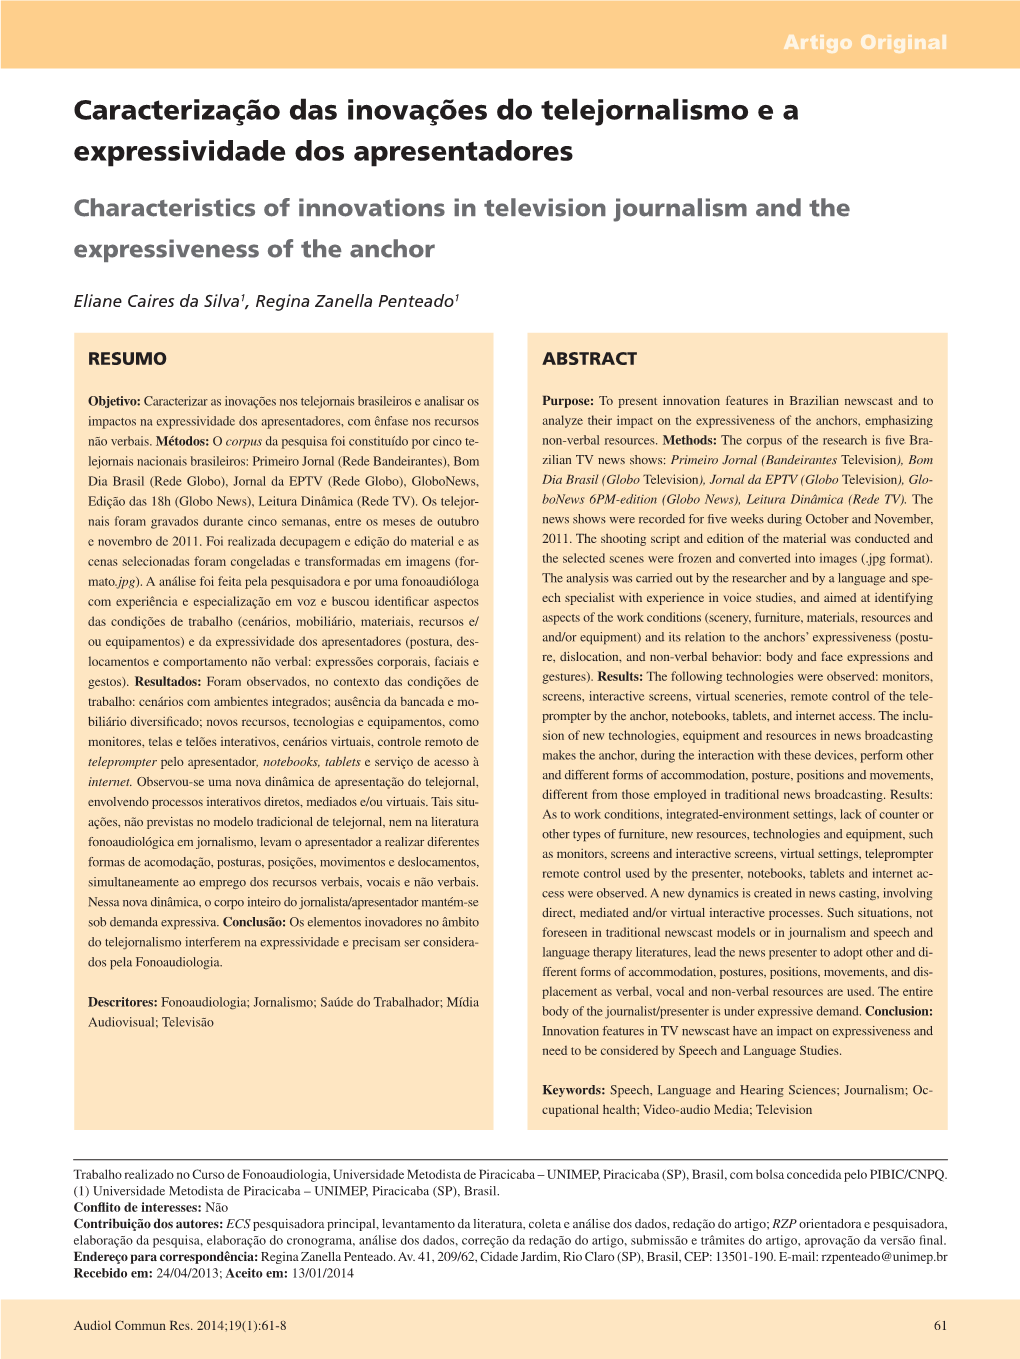 Characteristics of Innovations in Television Journalism and the Expressiveness of the Anchor